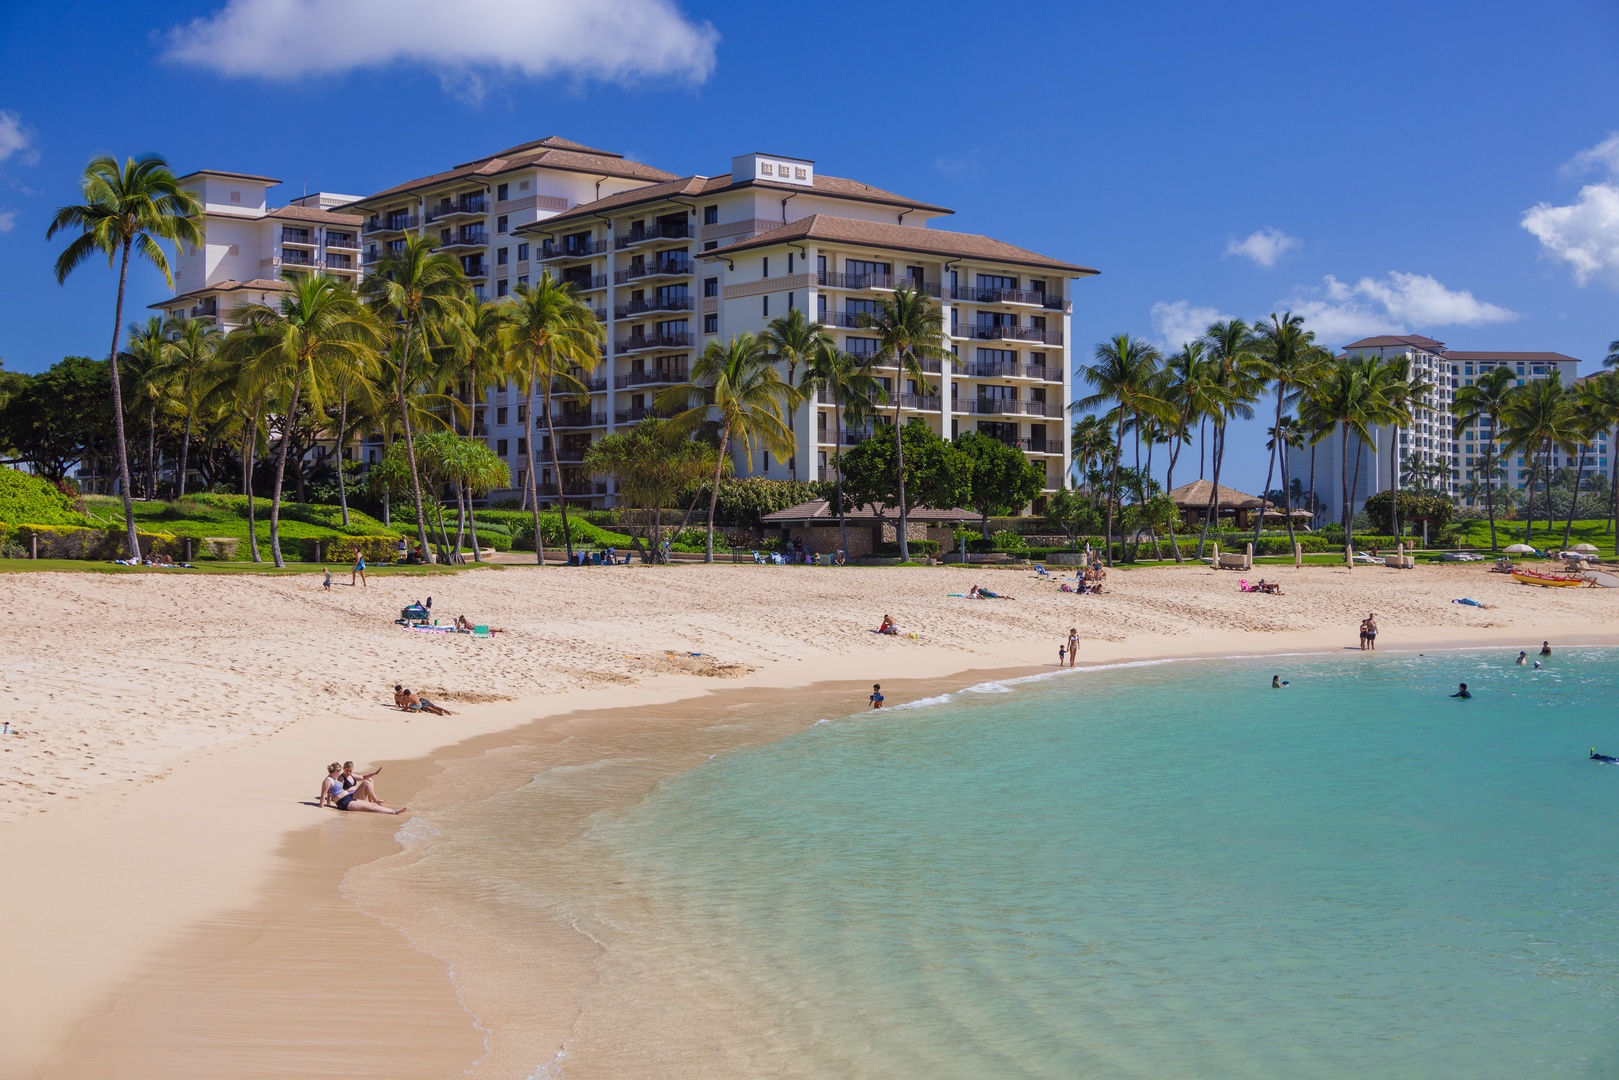 Kapolei Vacation Rentals, Ko Olina Kai 1051D - The private lagoon at Ko Olina is the perfect place for a relaxing afternoon in the sun.